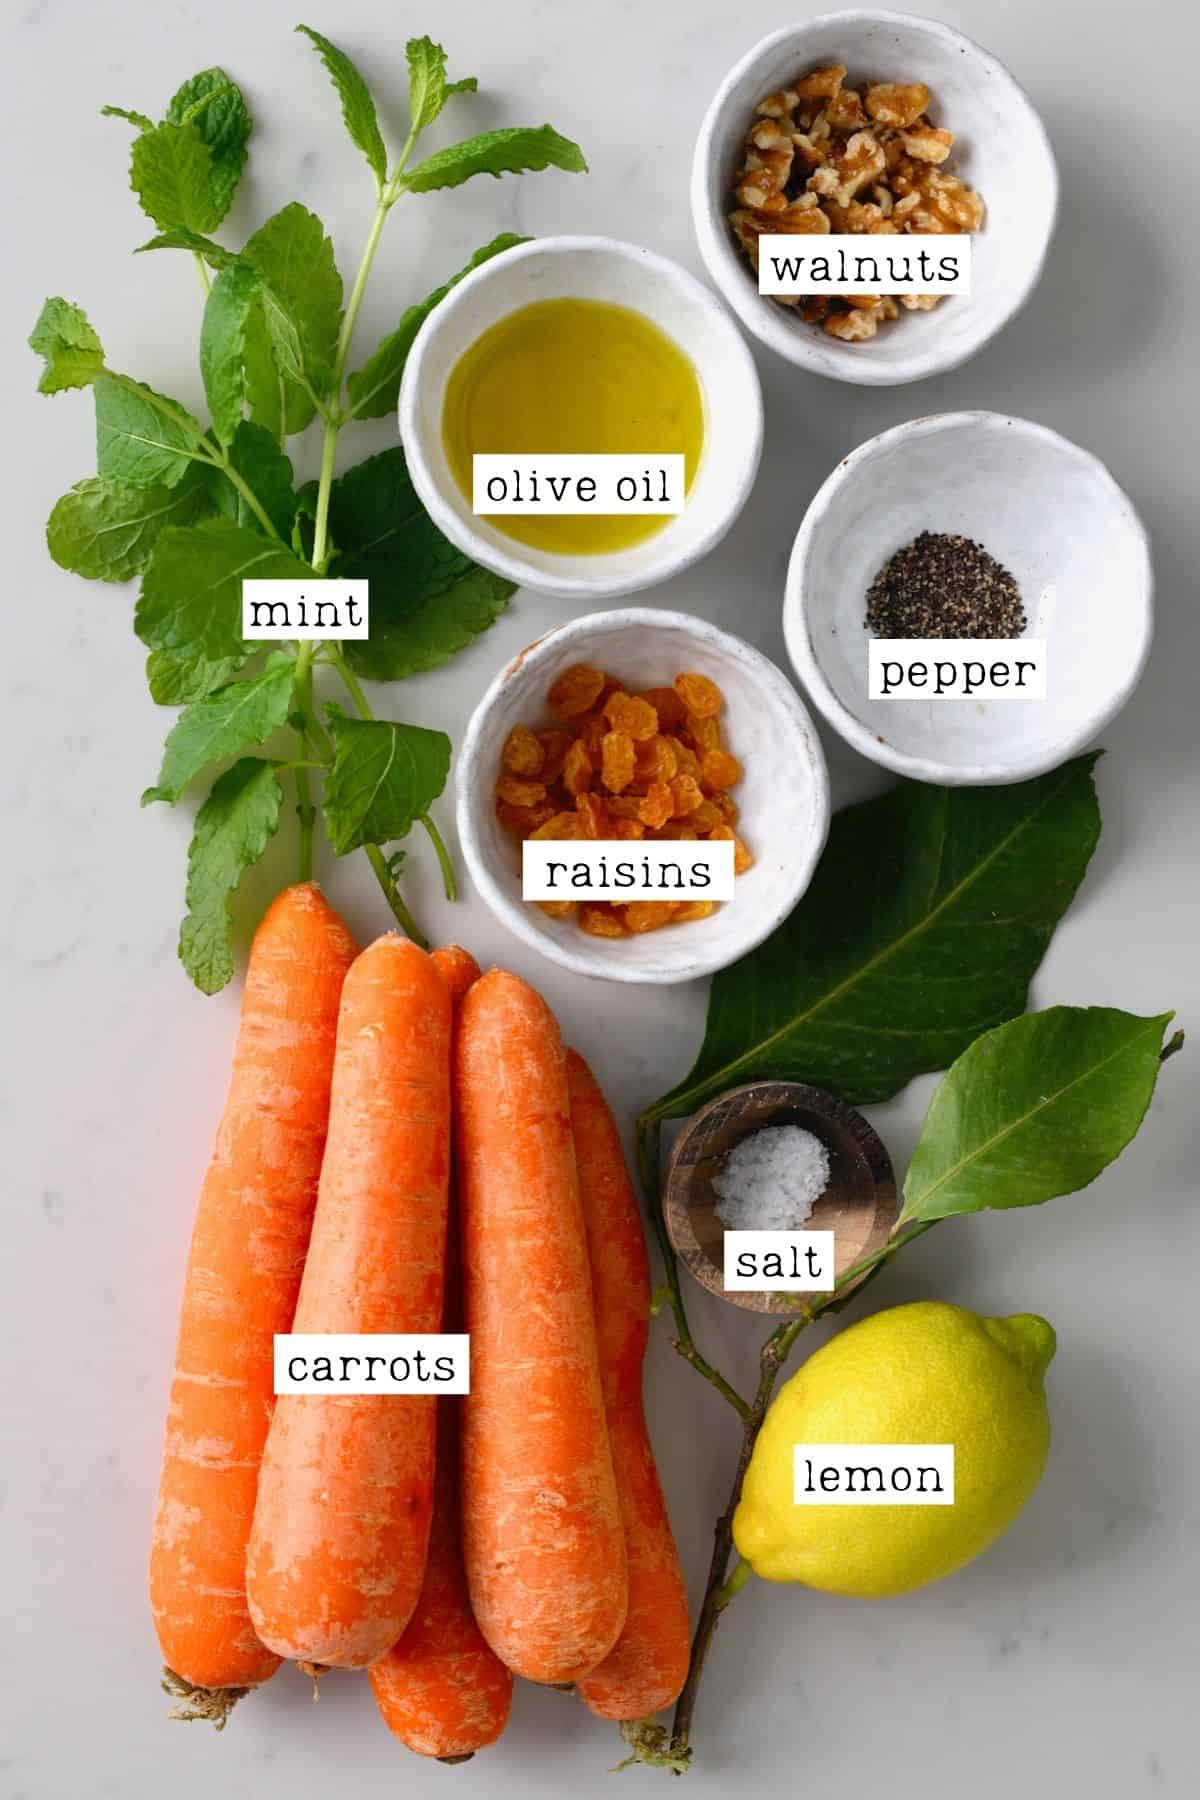 Ingredients for simple carrot salad